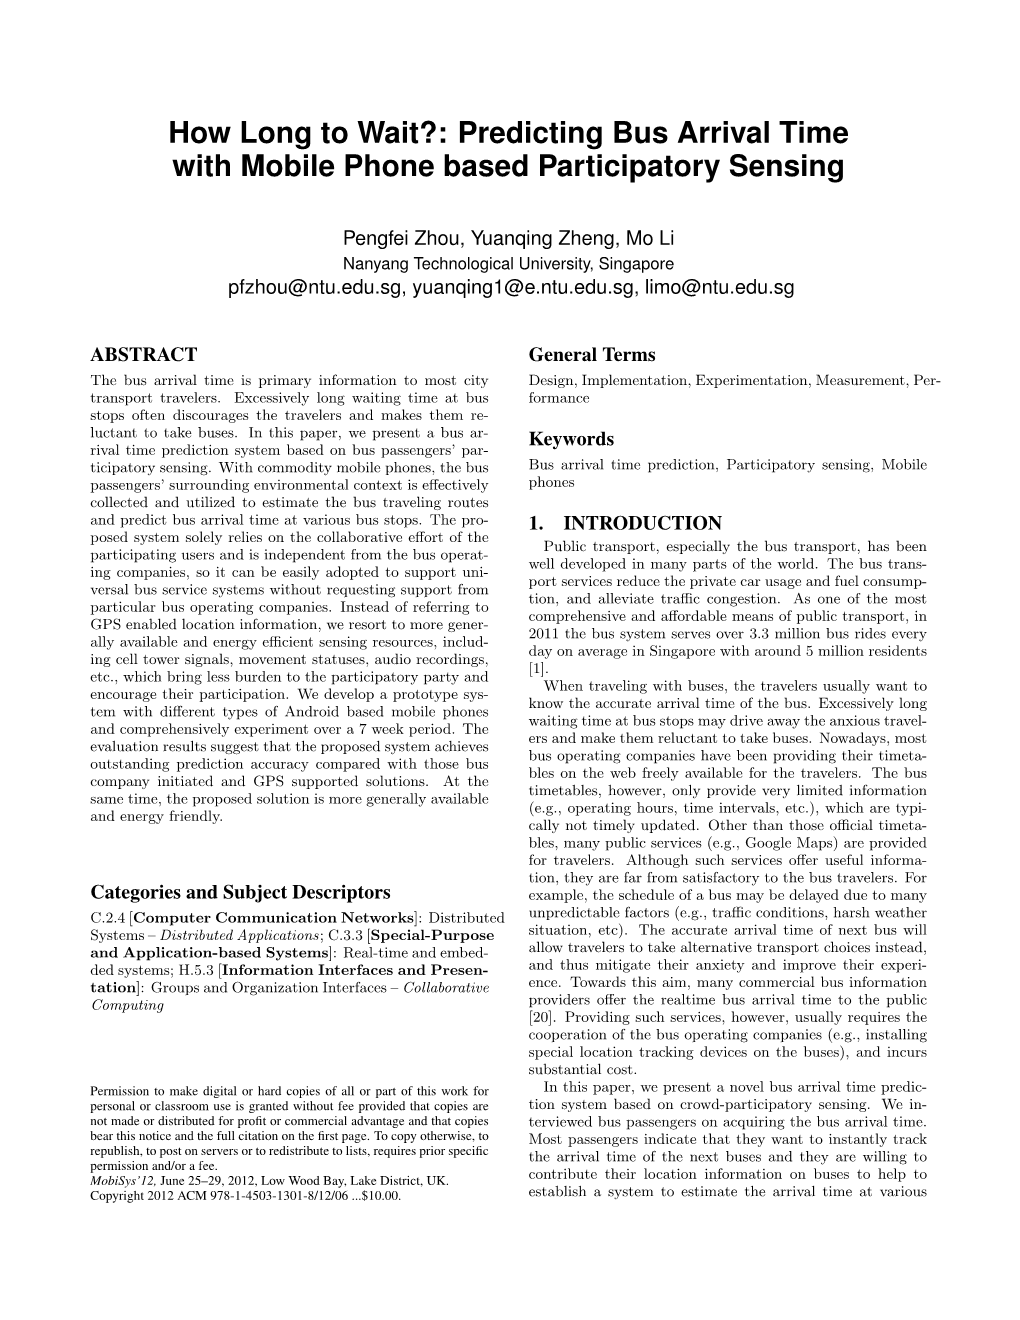 Predicting Bus Arrival Time with Mobile Phone Based Participatory Sensing